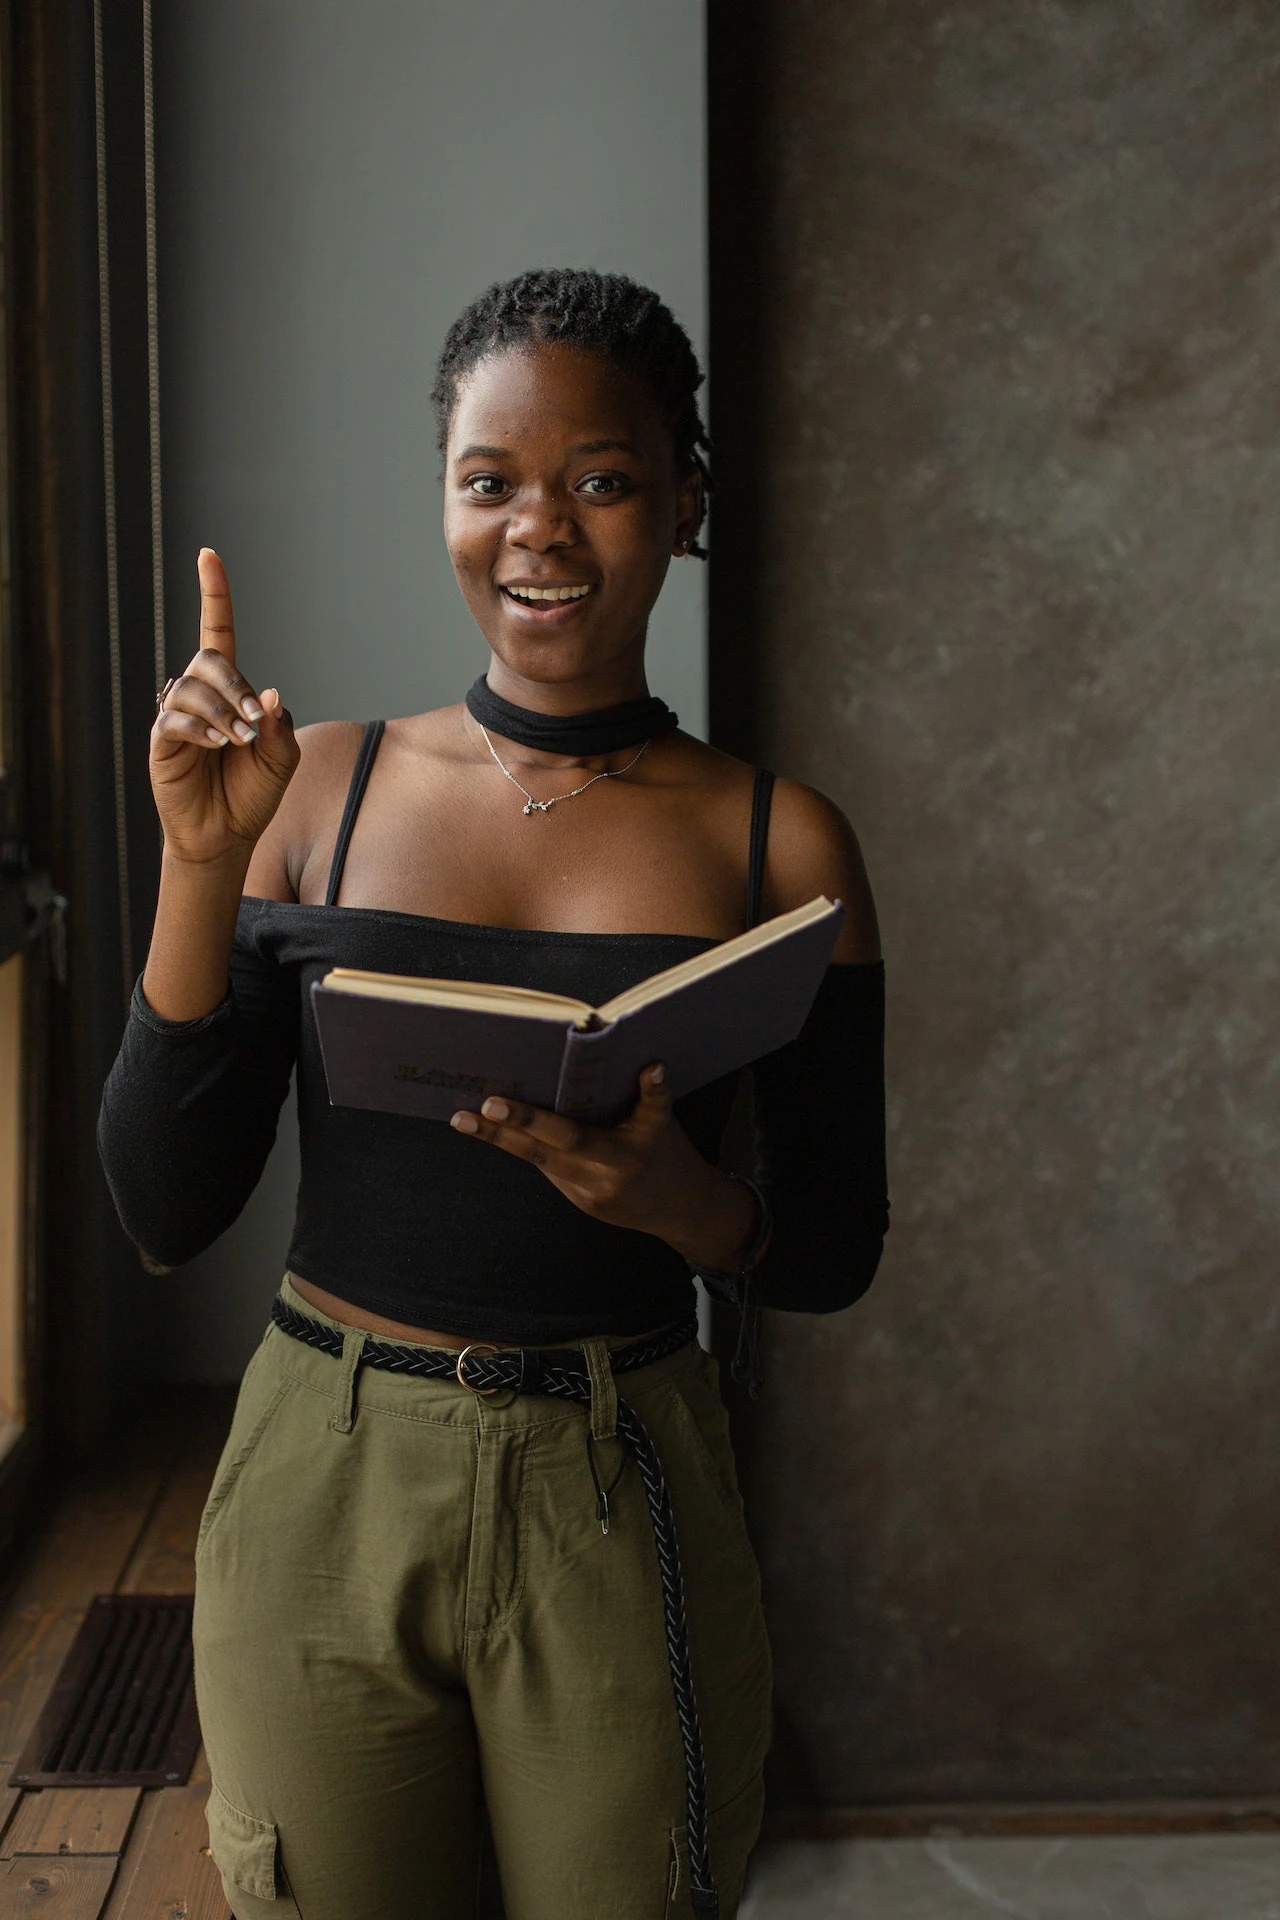 dark skinned woman holding a book, looking excited